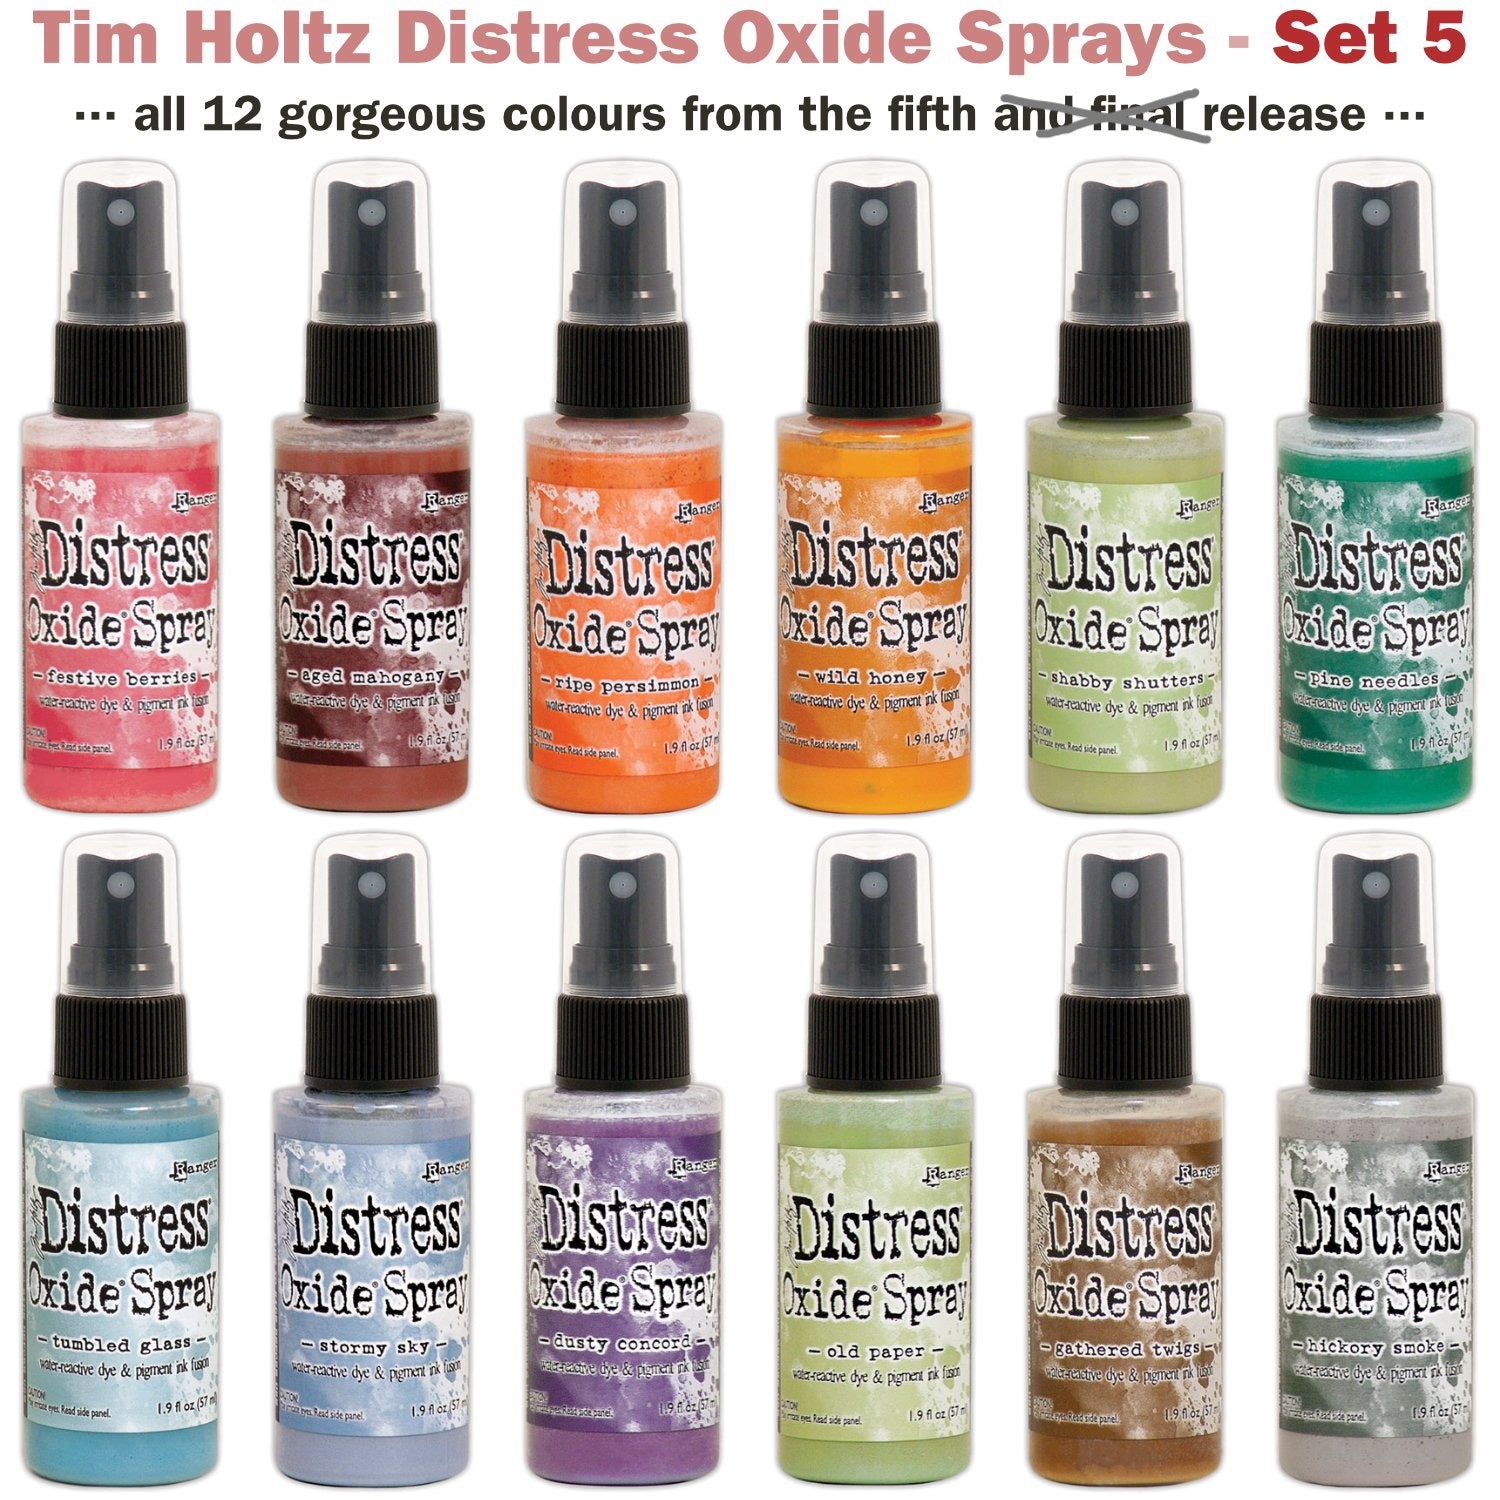 image showing Set 5 of the Distress Oxide Spray from Tim Holtz and Ranger, for sale at Art by Jenny in Australia